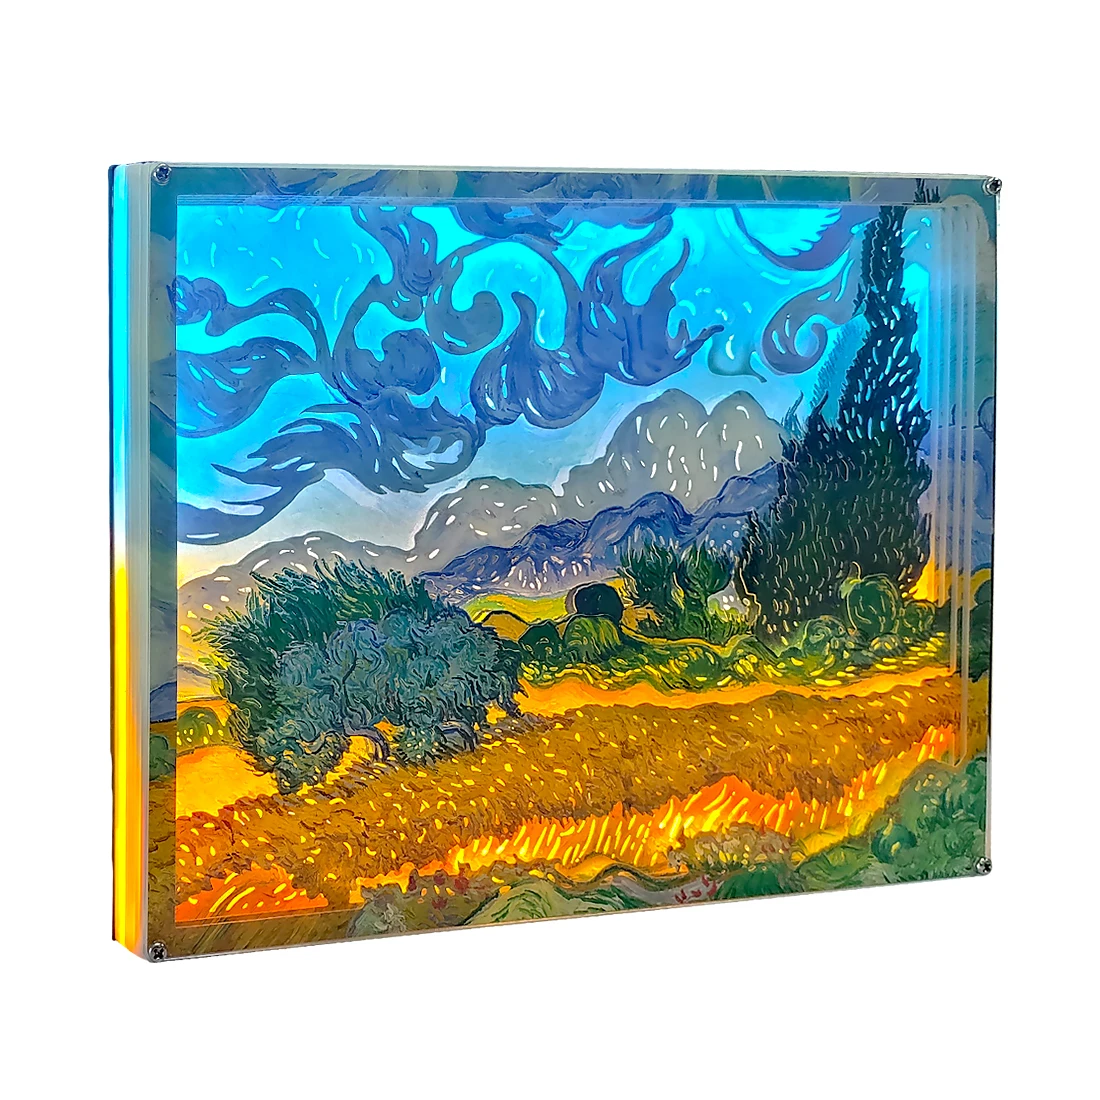 Bedroom Night Lamp Led Paper Shadow Box Van Gogh Wheat Field Vintage Painting Wall Photo Frames Custom Photo Mothers Day Gift